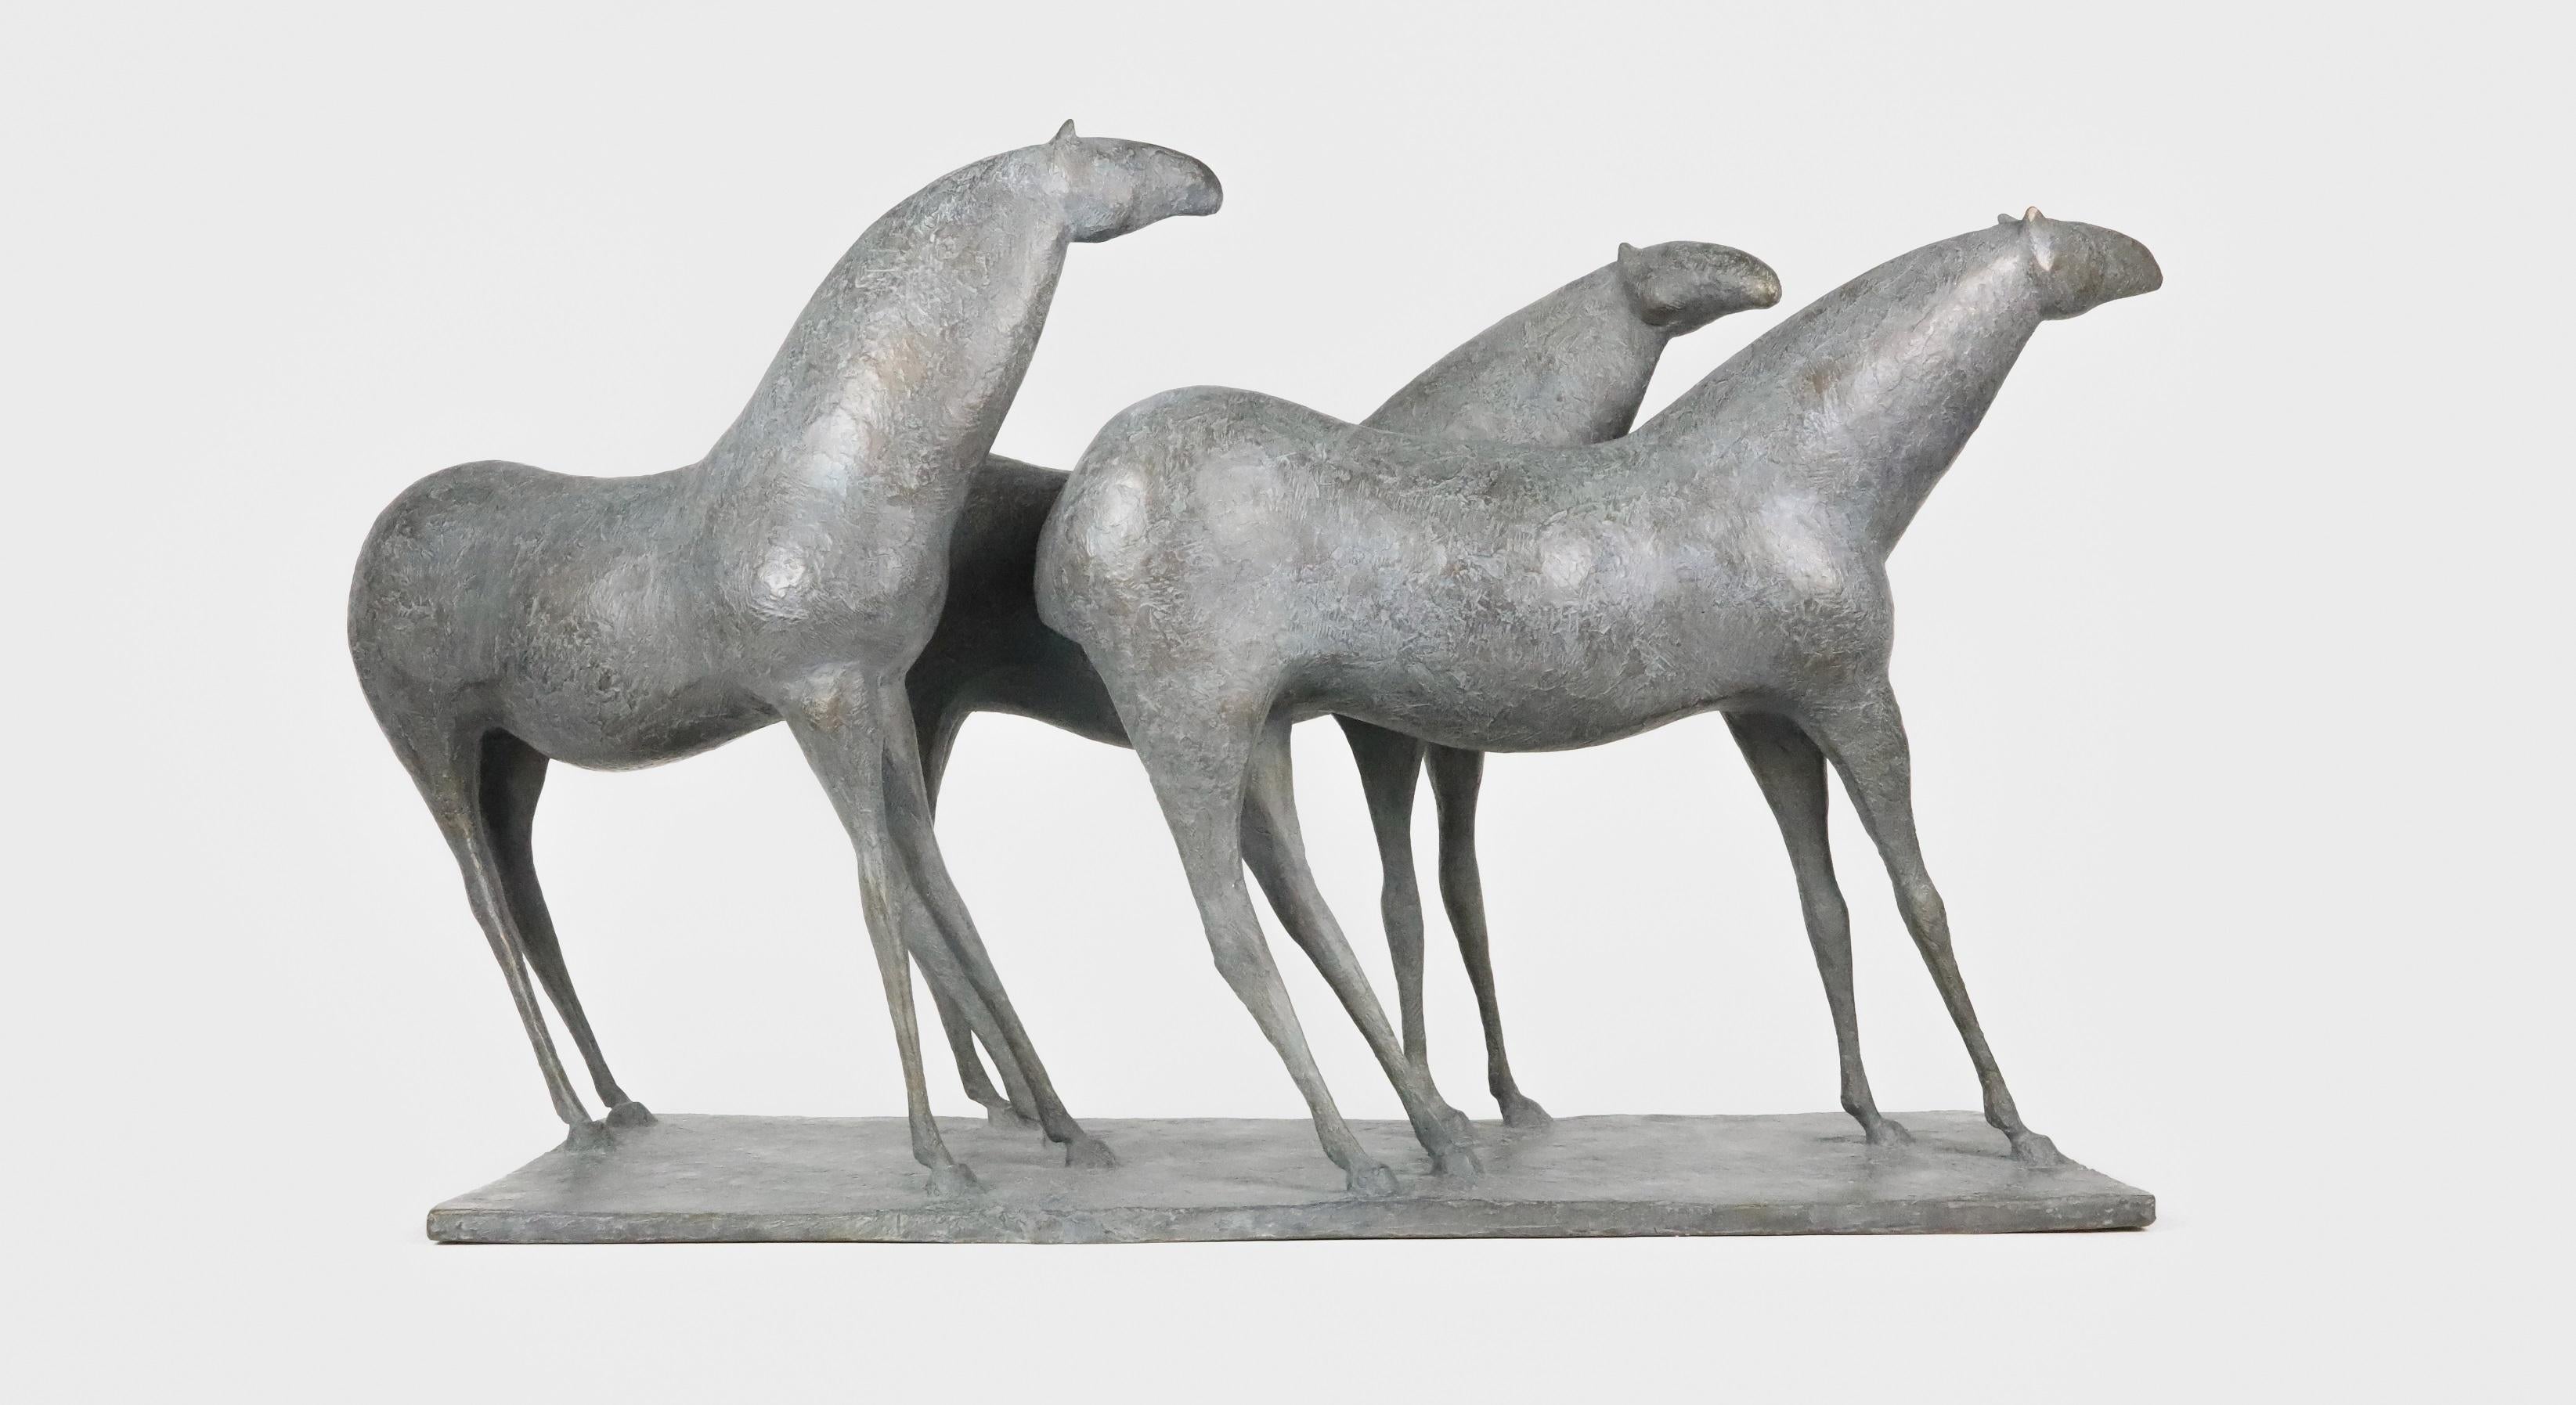 Three Horses is a bronze sculpture by French contemporary artist Pierre Yermia, dimensions are 52 cm × 93 cm × 30 cm (20.5 × 36.6 × 11.8 in). The sculpture is signed and numbered, it is part of a limited edition of 8 editions + 4 artist’s proofs,